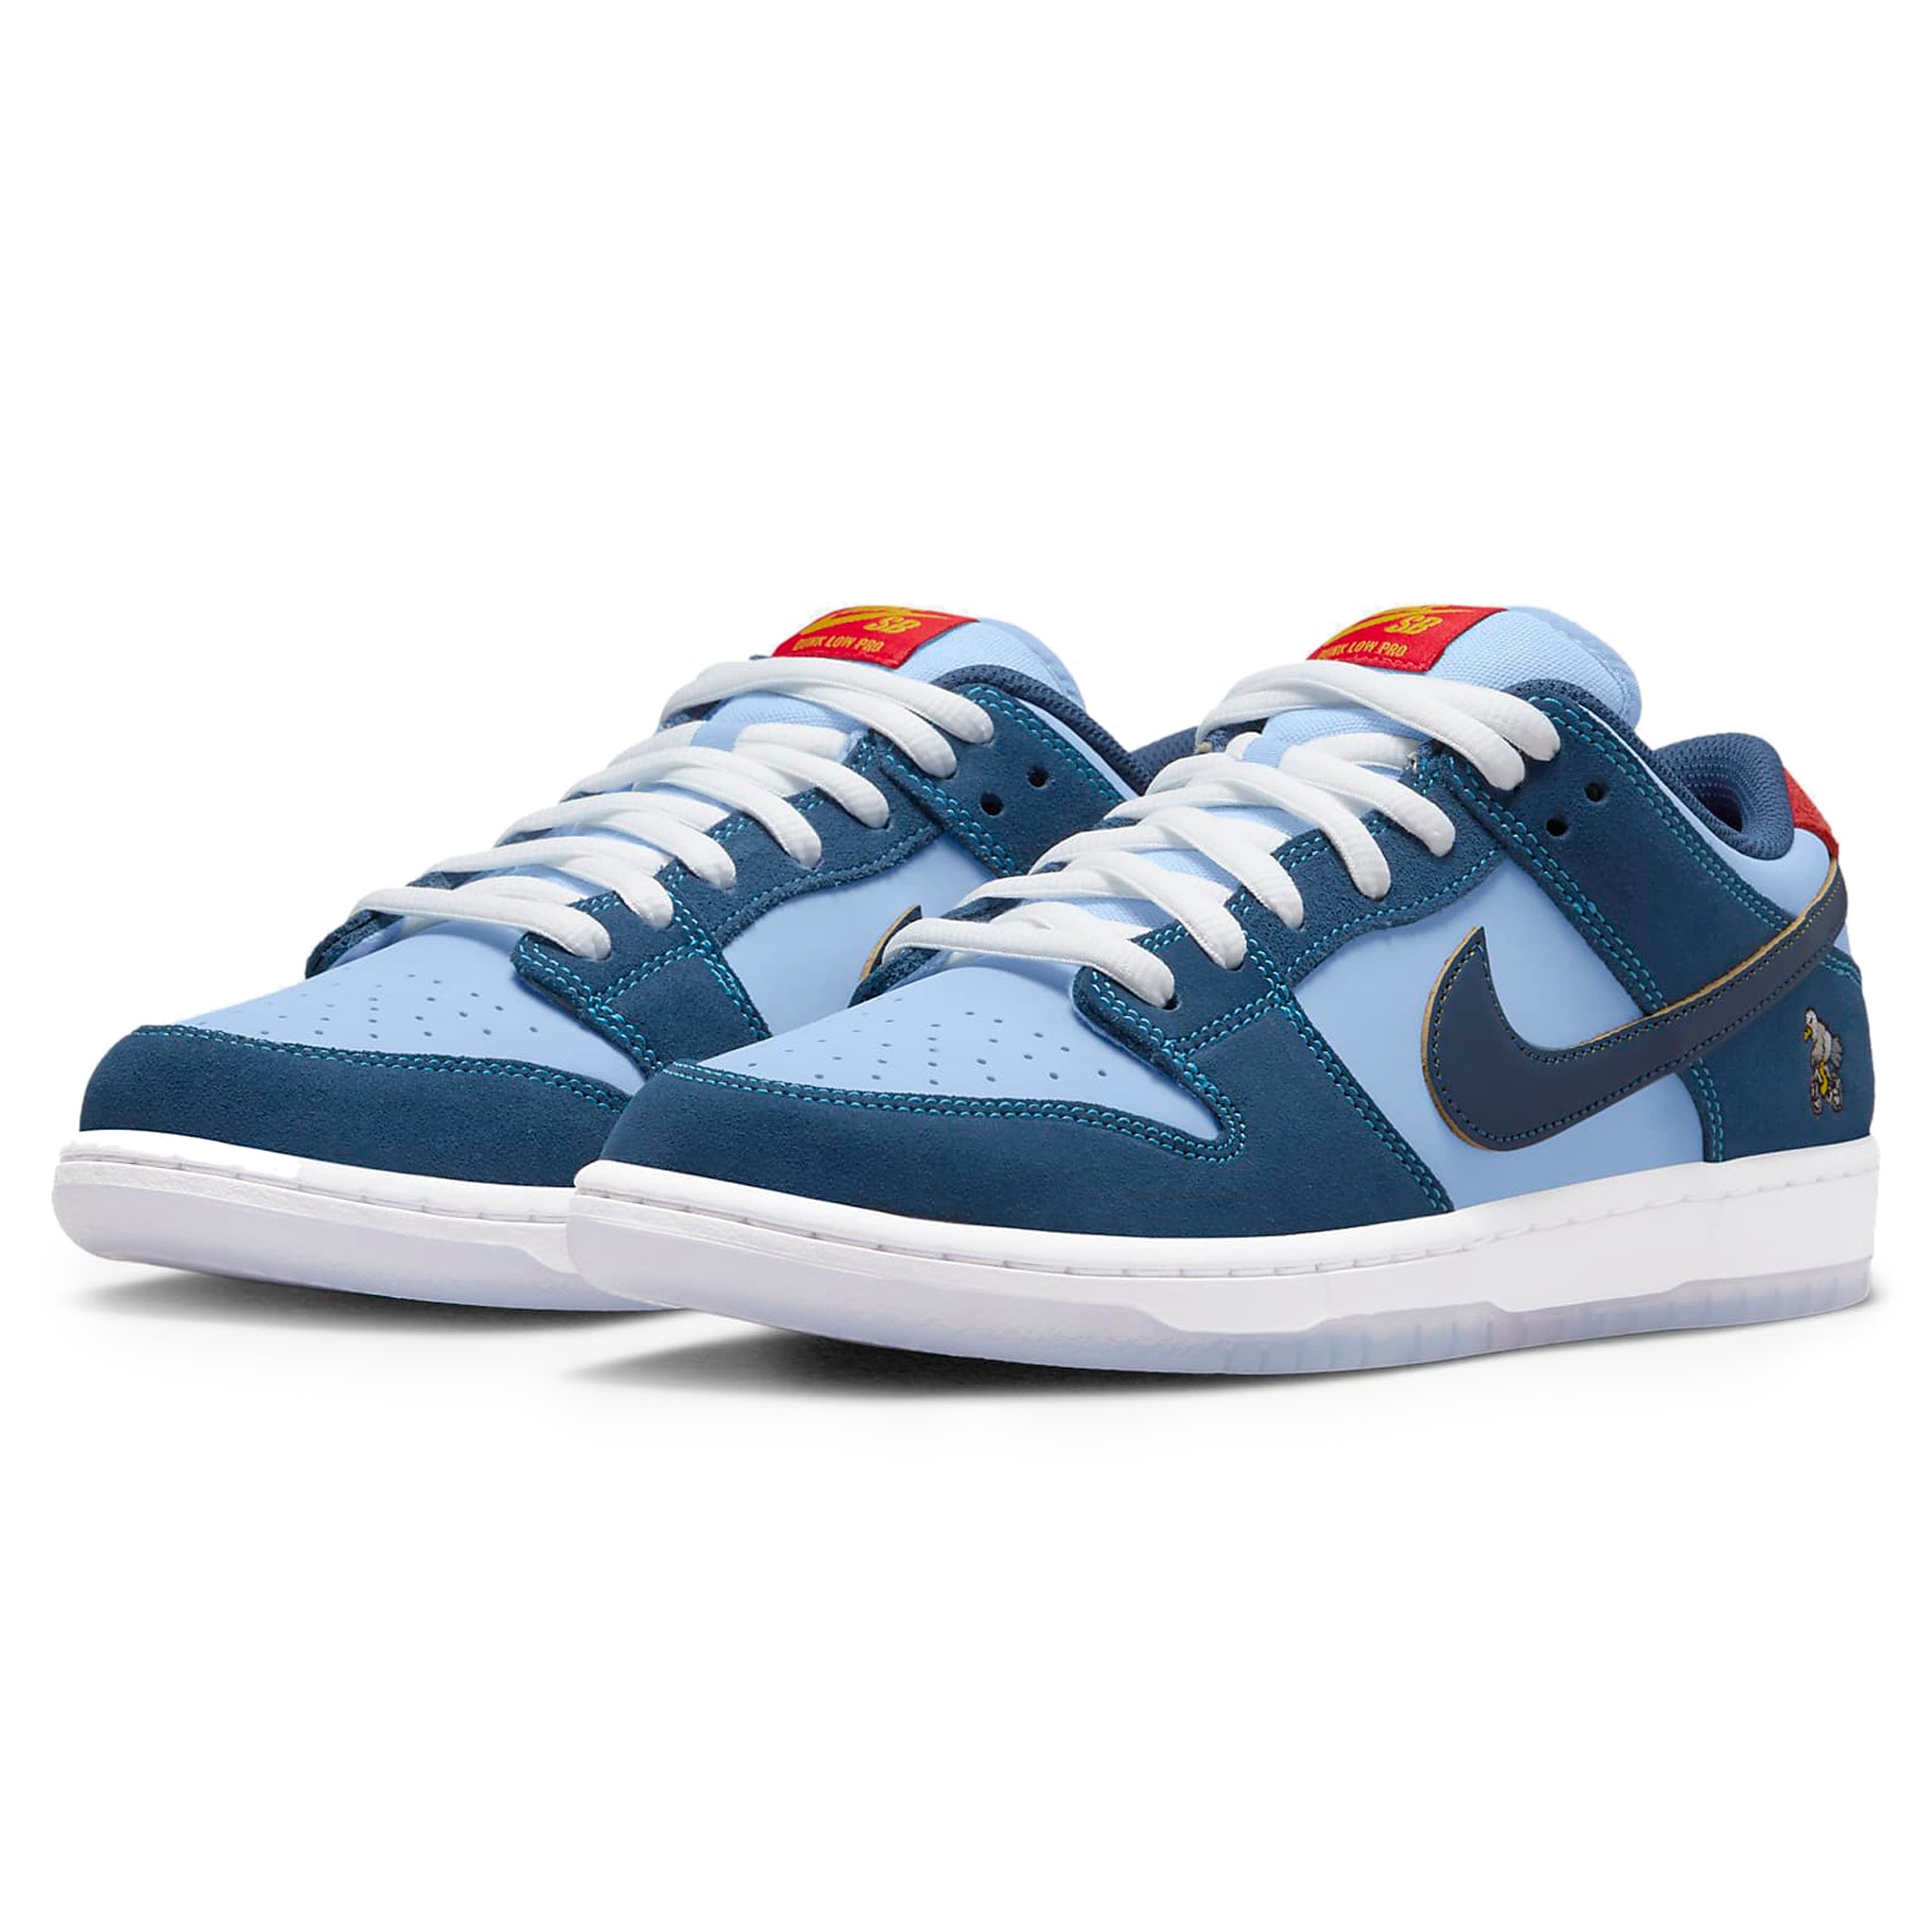 Front side view of Nike SB Dunk Low Pro Why So Sad? DX5549-400